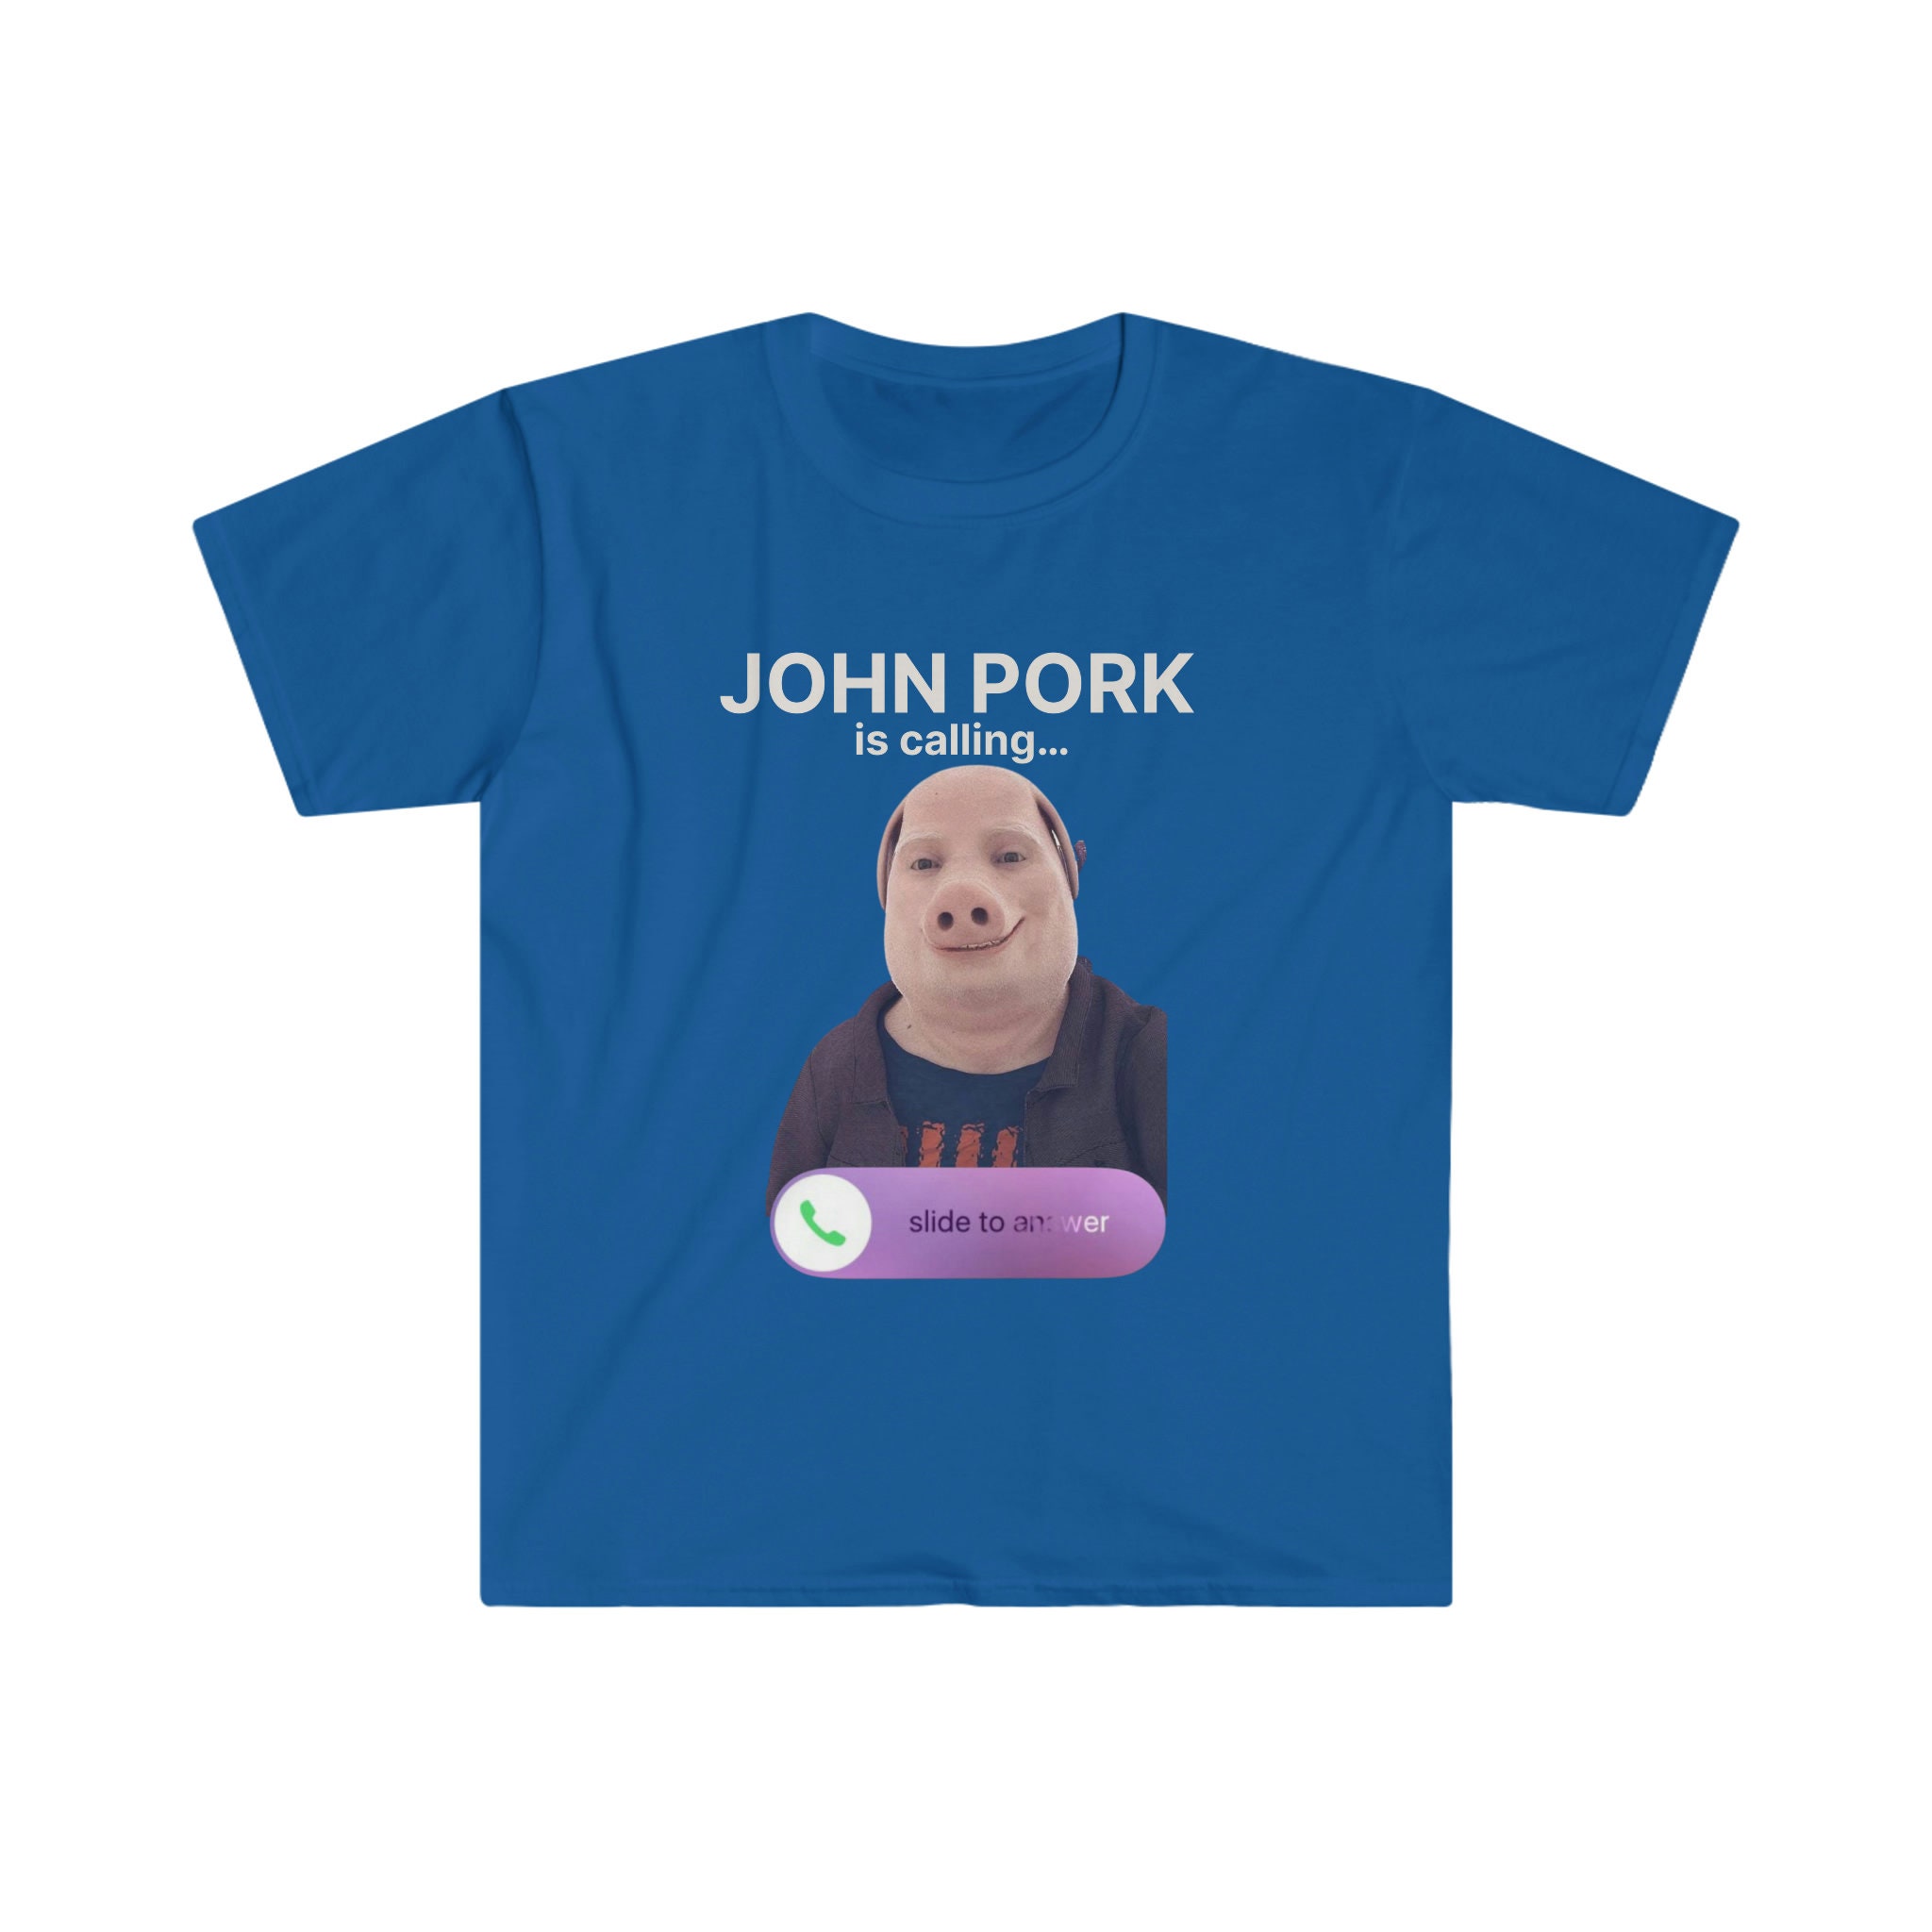 John Pork Is Calling T Shirts Funny Graphic Tee Top Oversized Cotton Humor Pig  Meme Design Mens Clothes Oversized Streetwear - AliExpress